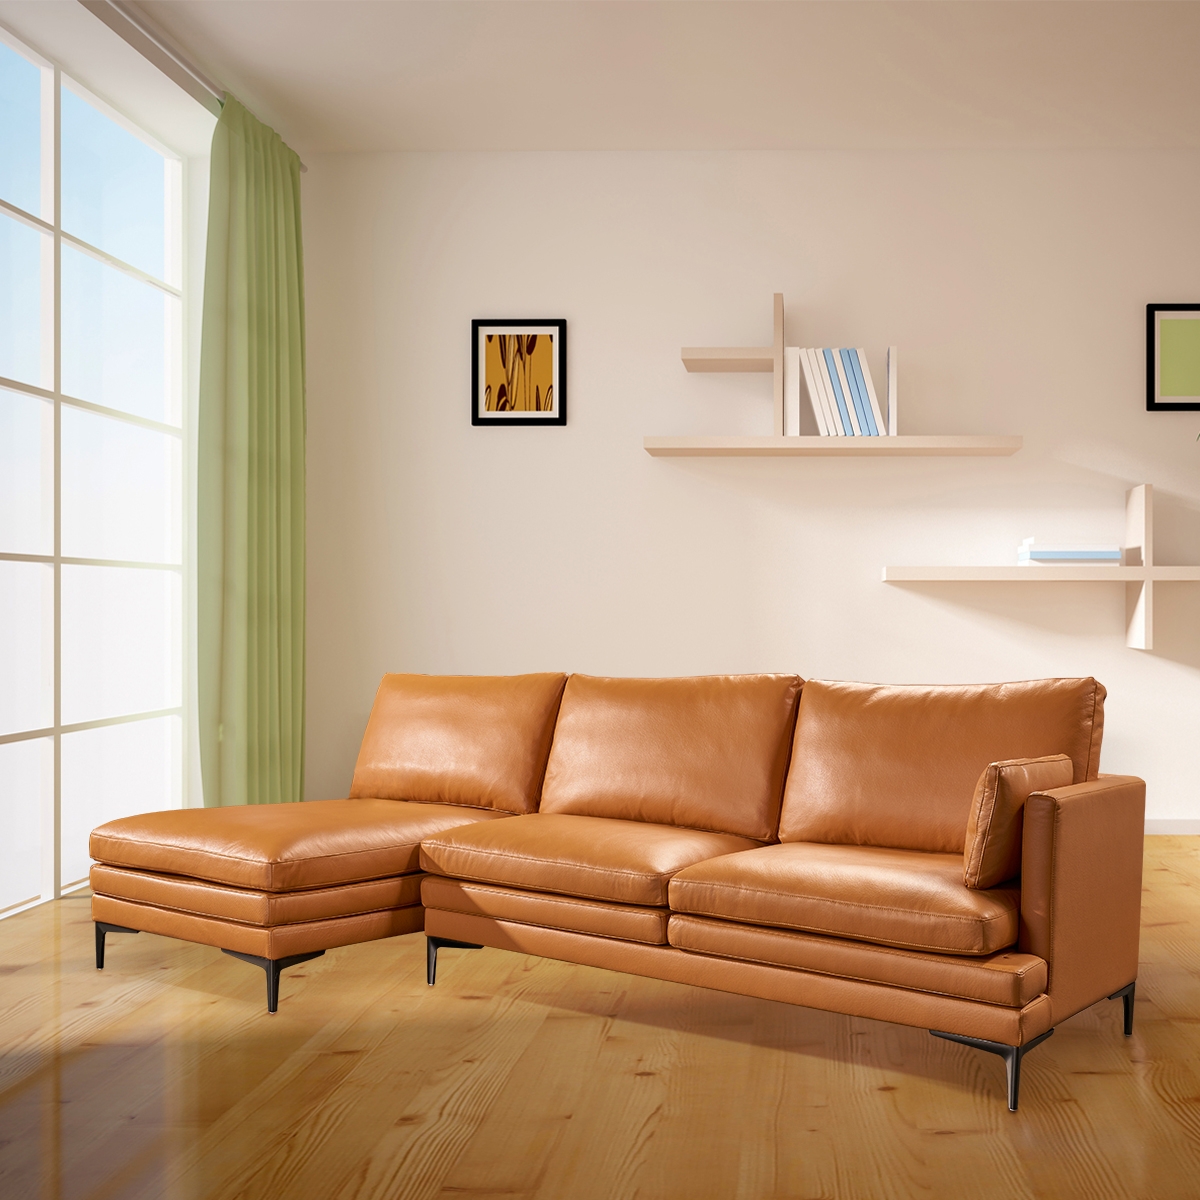 Midcentury Orange Fabric 3 Seat L-shaped Living Room Sectional Sofa Set With Reversible Chaise Lounge